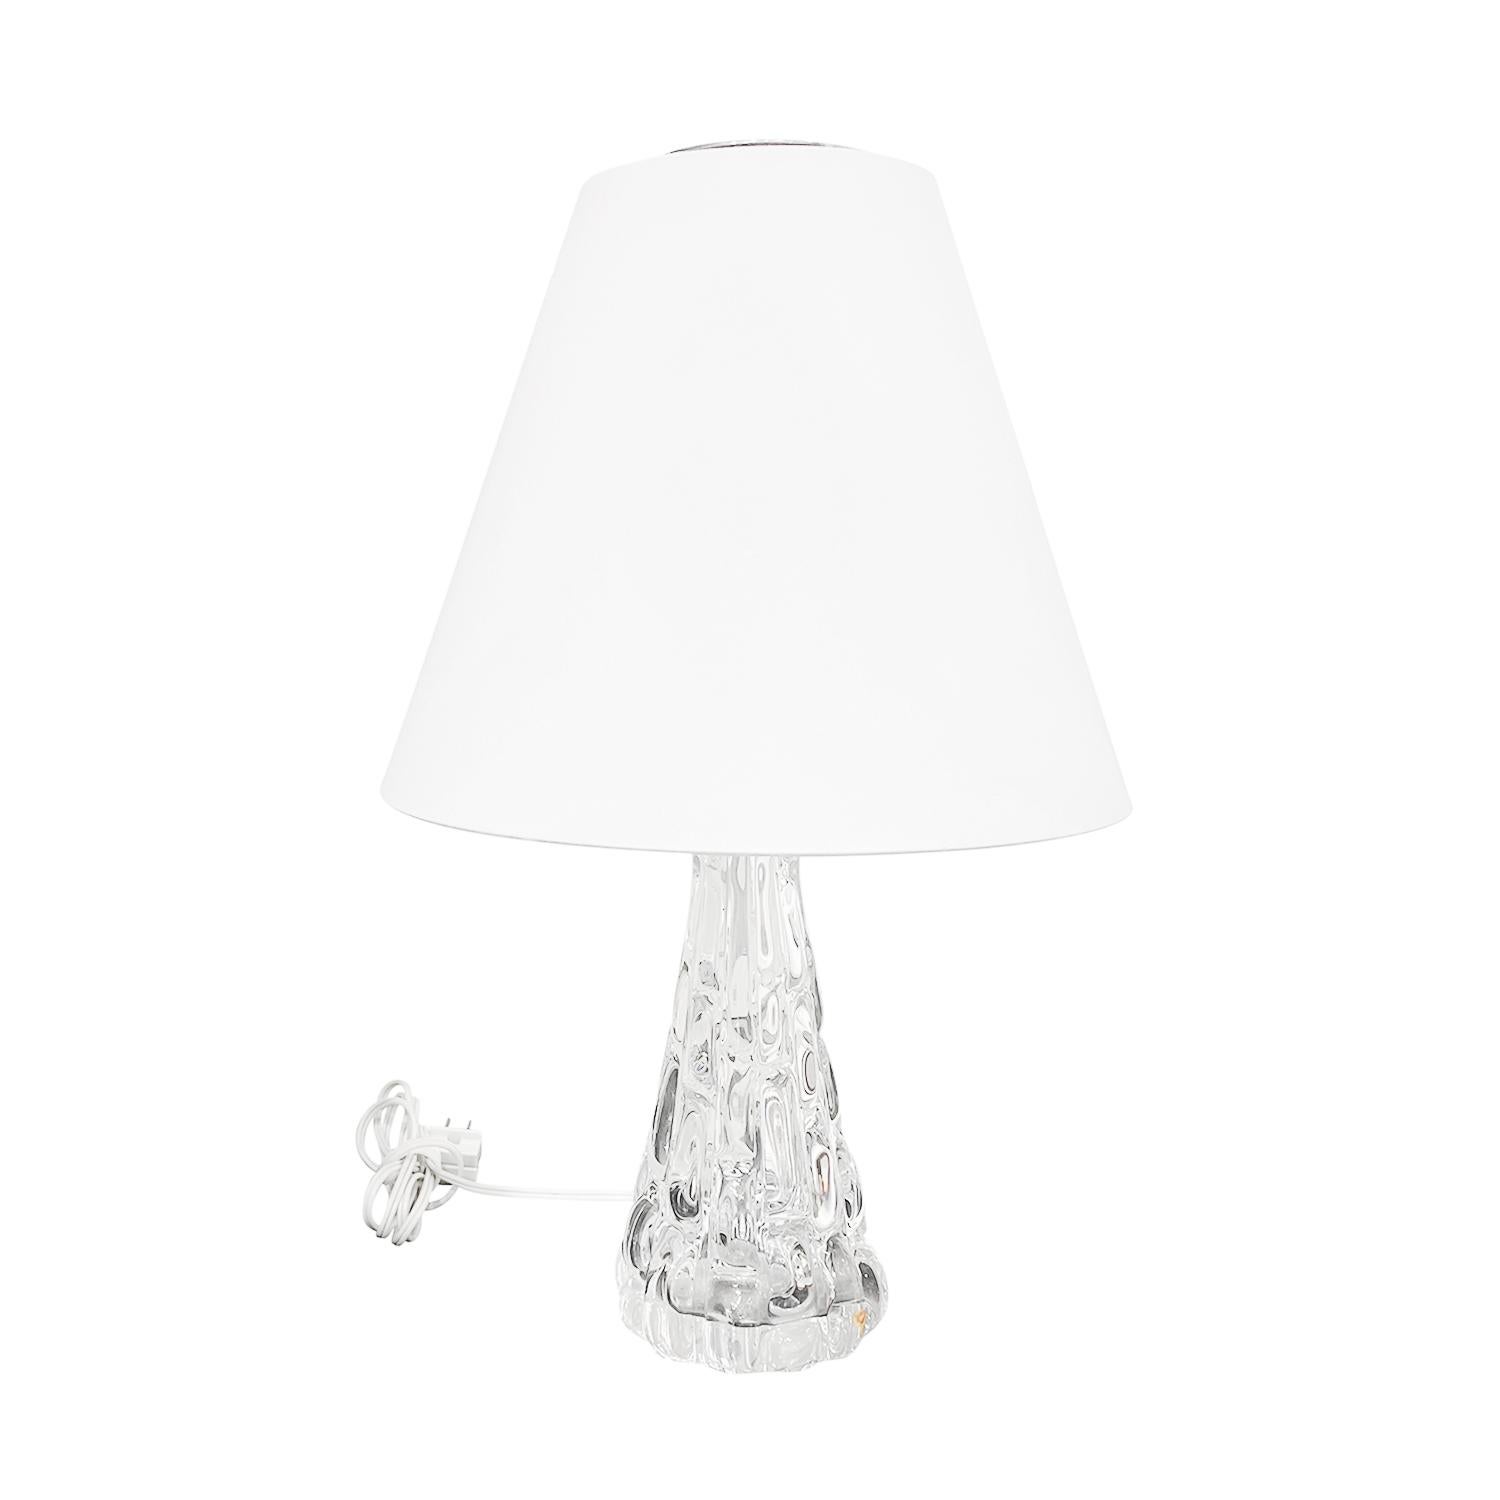 A vintage Mid-Century modern Swedish desk lamp with a new white round shade made of hand blown clear Orrefors glass, designed by Carl Fagerlund and produced, signed by Orrefors in good condition. The Scandinavian table light is enhanced with a